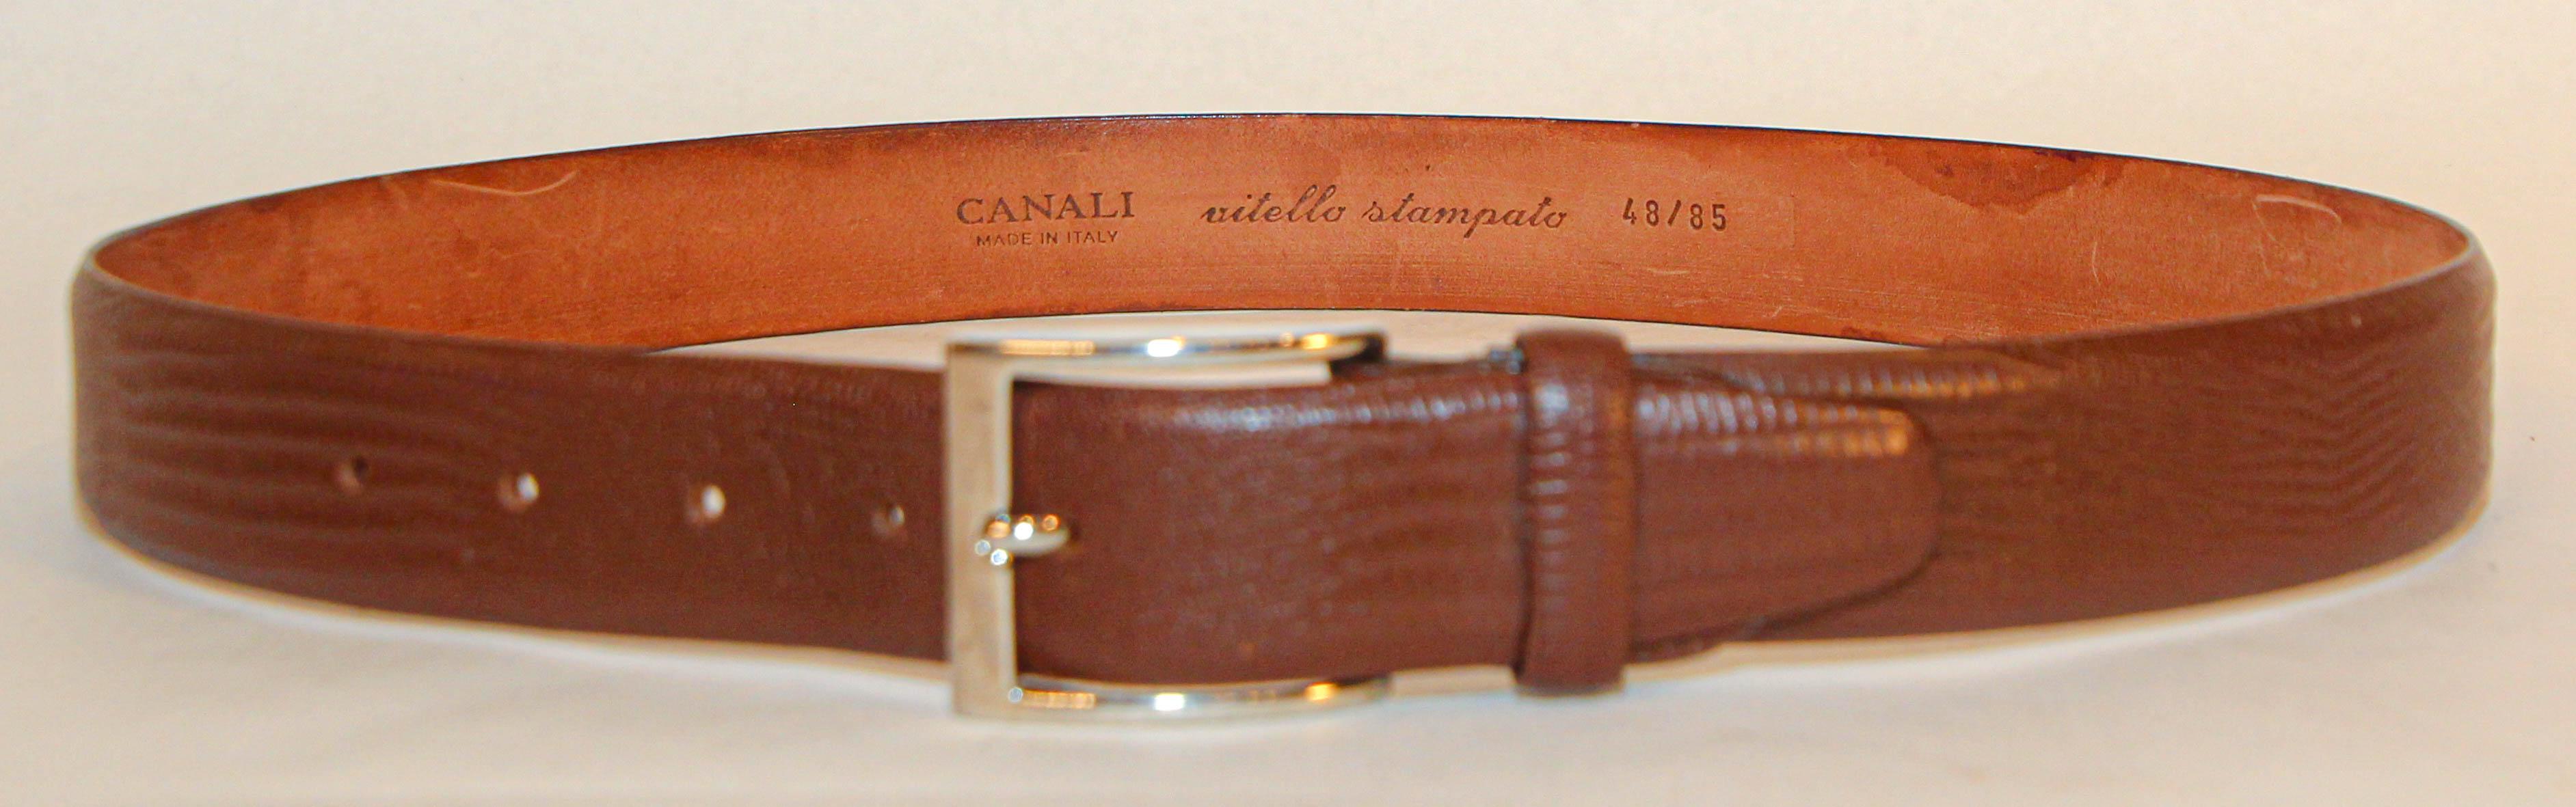 Canali Italian Texture brown Leather Belt Vitello Stampato.
Textured brown Pebbled Leather Belt size 48/85.
Made in Italy.
Measures approx: 37